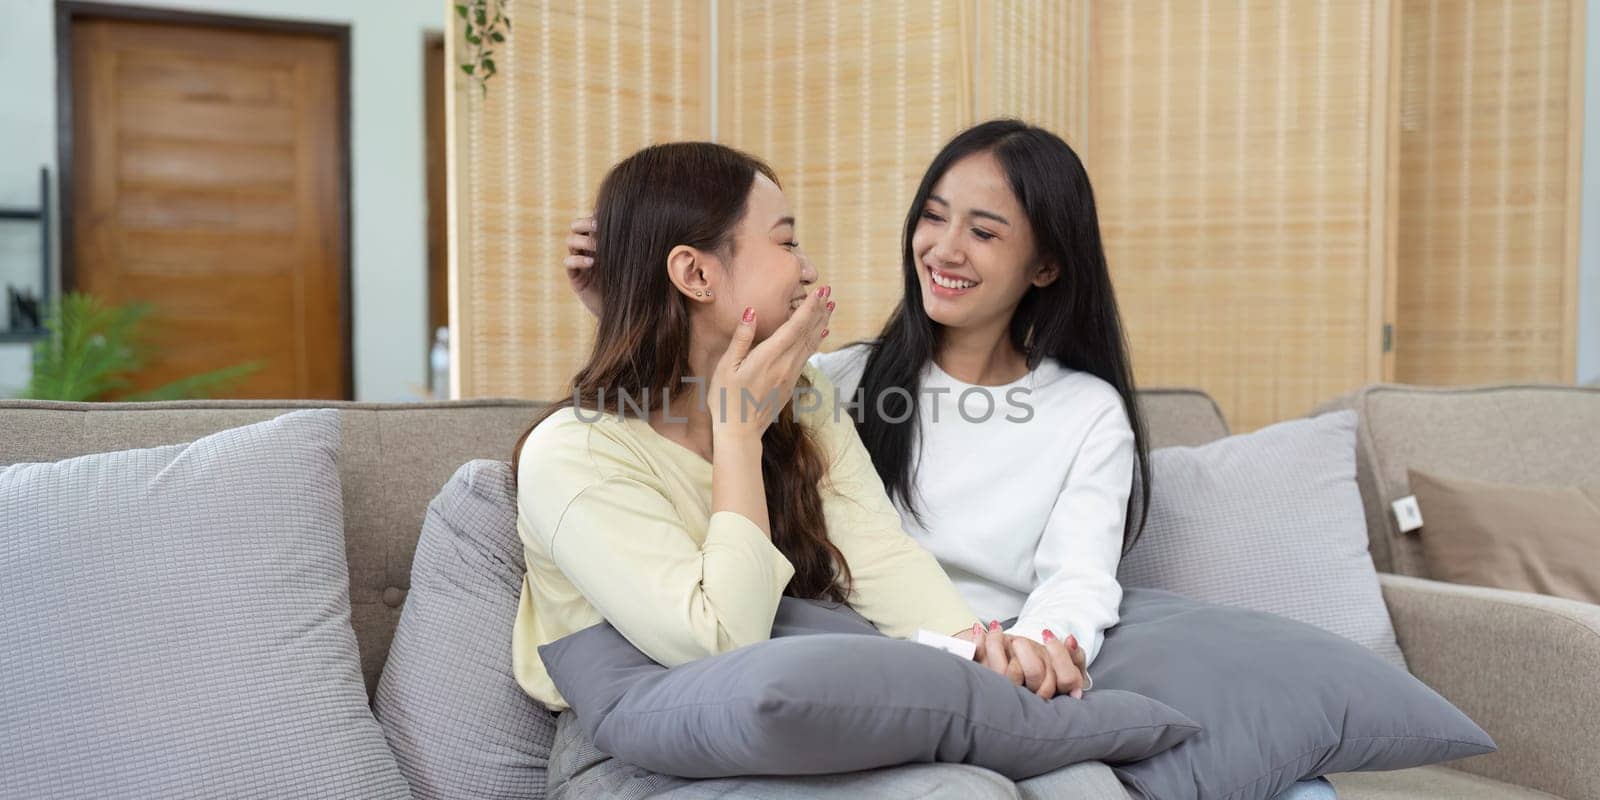 Loving LGBTQIA lesbian gay couple laughing together in Livingroom. Asian LGBTQIA lesbian gay couple laughed happy together while sitting on the sofa. Homosexual-LGBTQ concept..